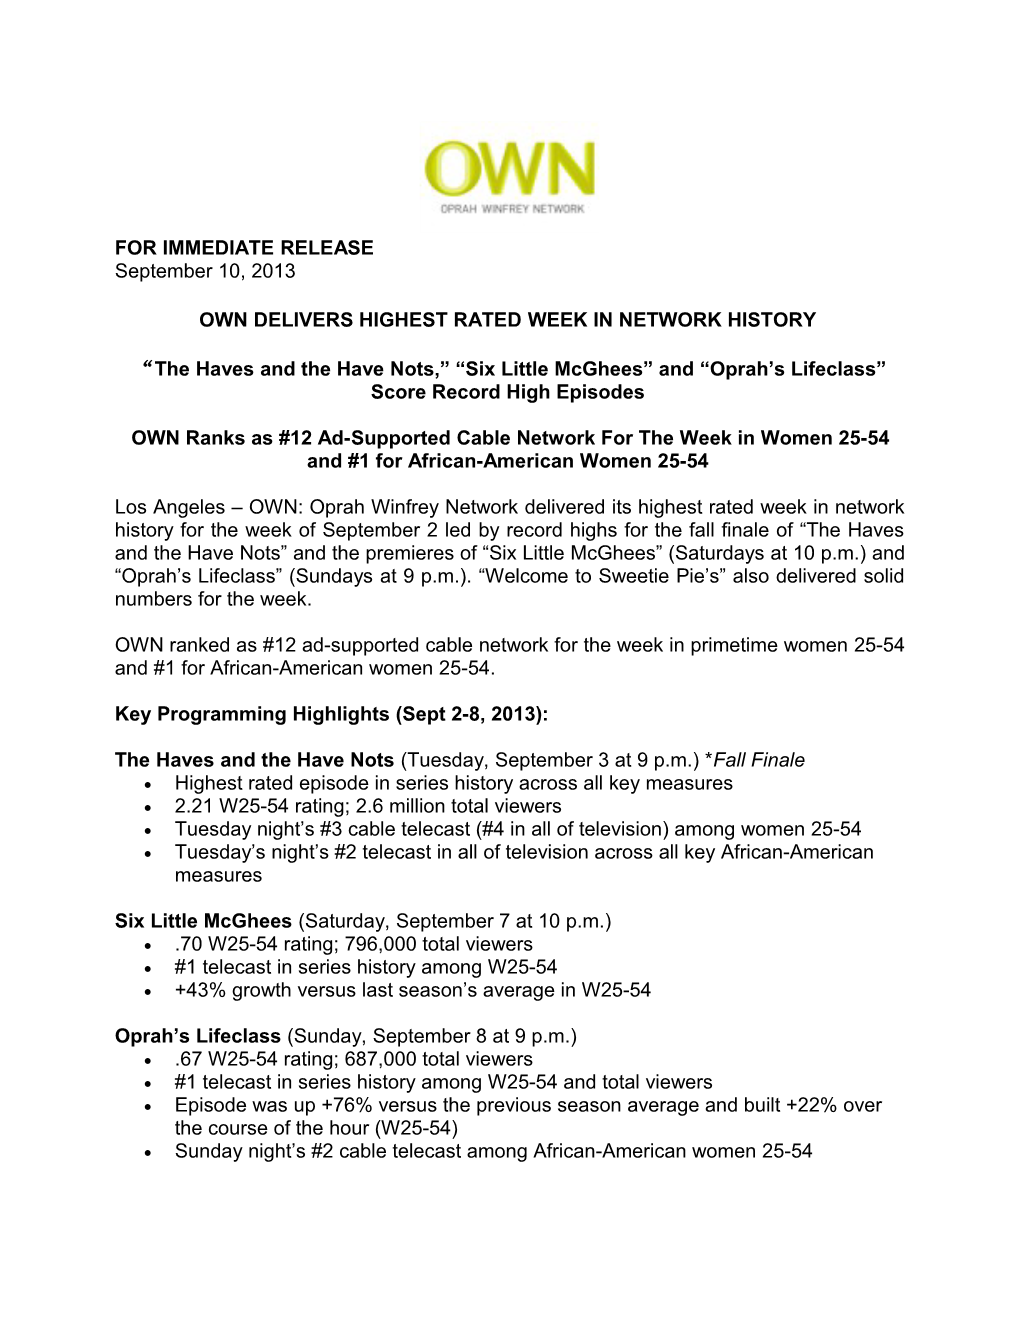 Own Delivers Highest Rated Week in Network History